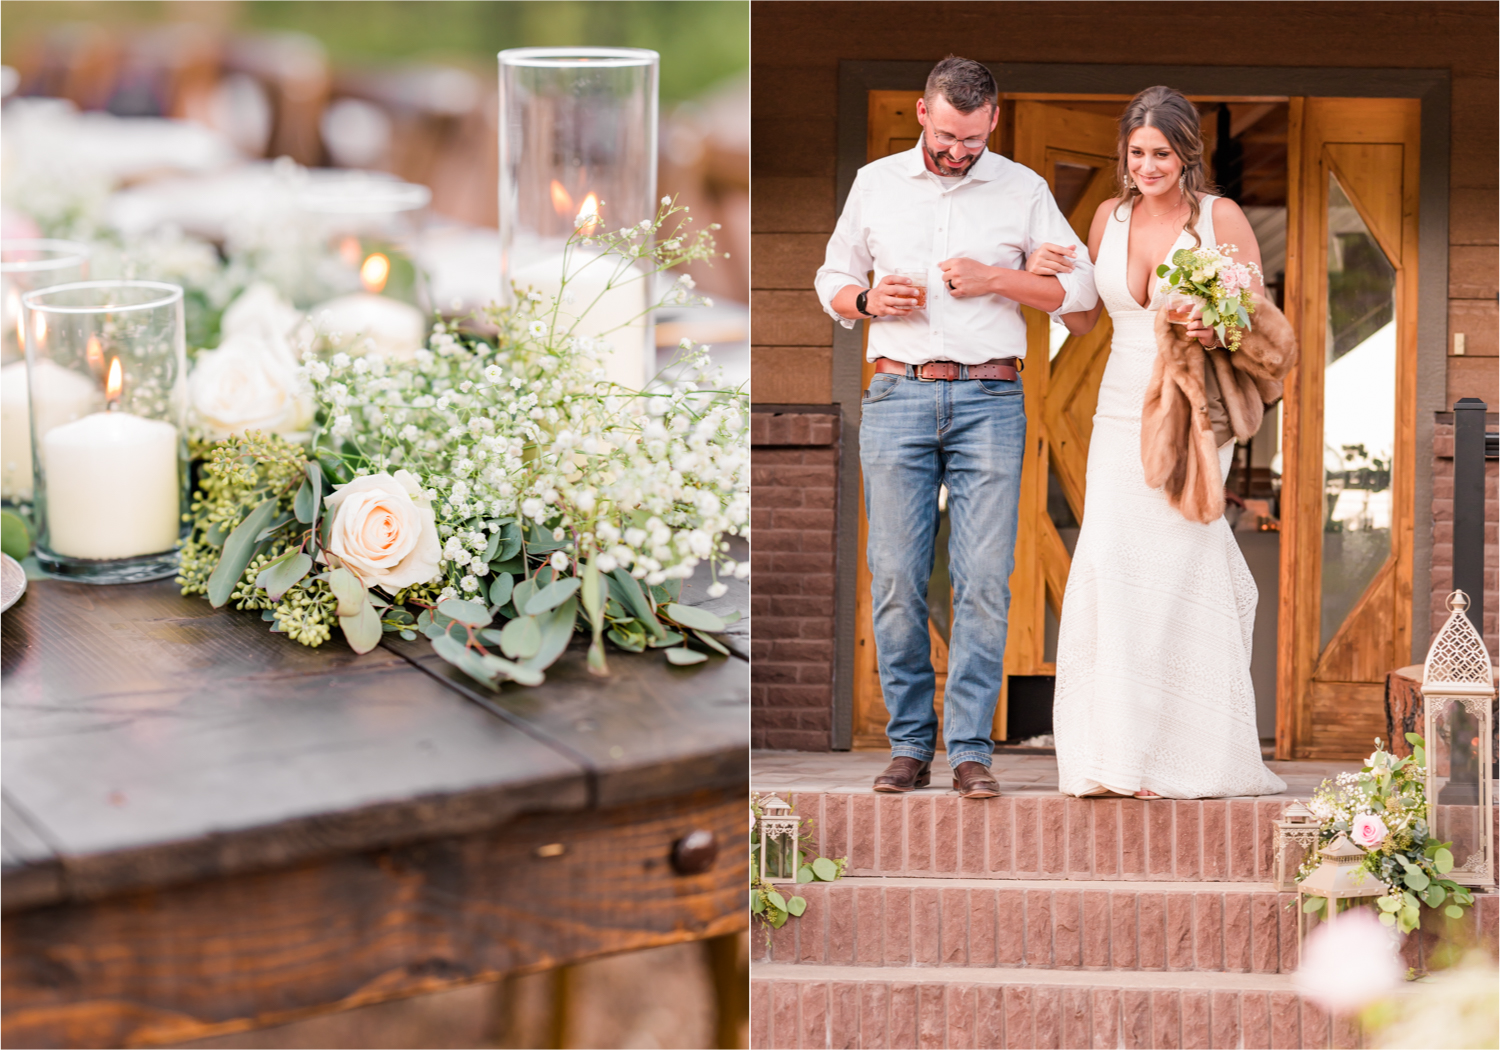 Autumn mountain wedding in Florence Colorado | Britni Girard Photography | Colorado Wedding Photo and Video Team | Mountainside Cabin for intimate wedding with rustic farm-tables and romantic details | Bride with fur coat